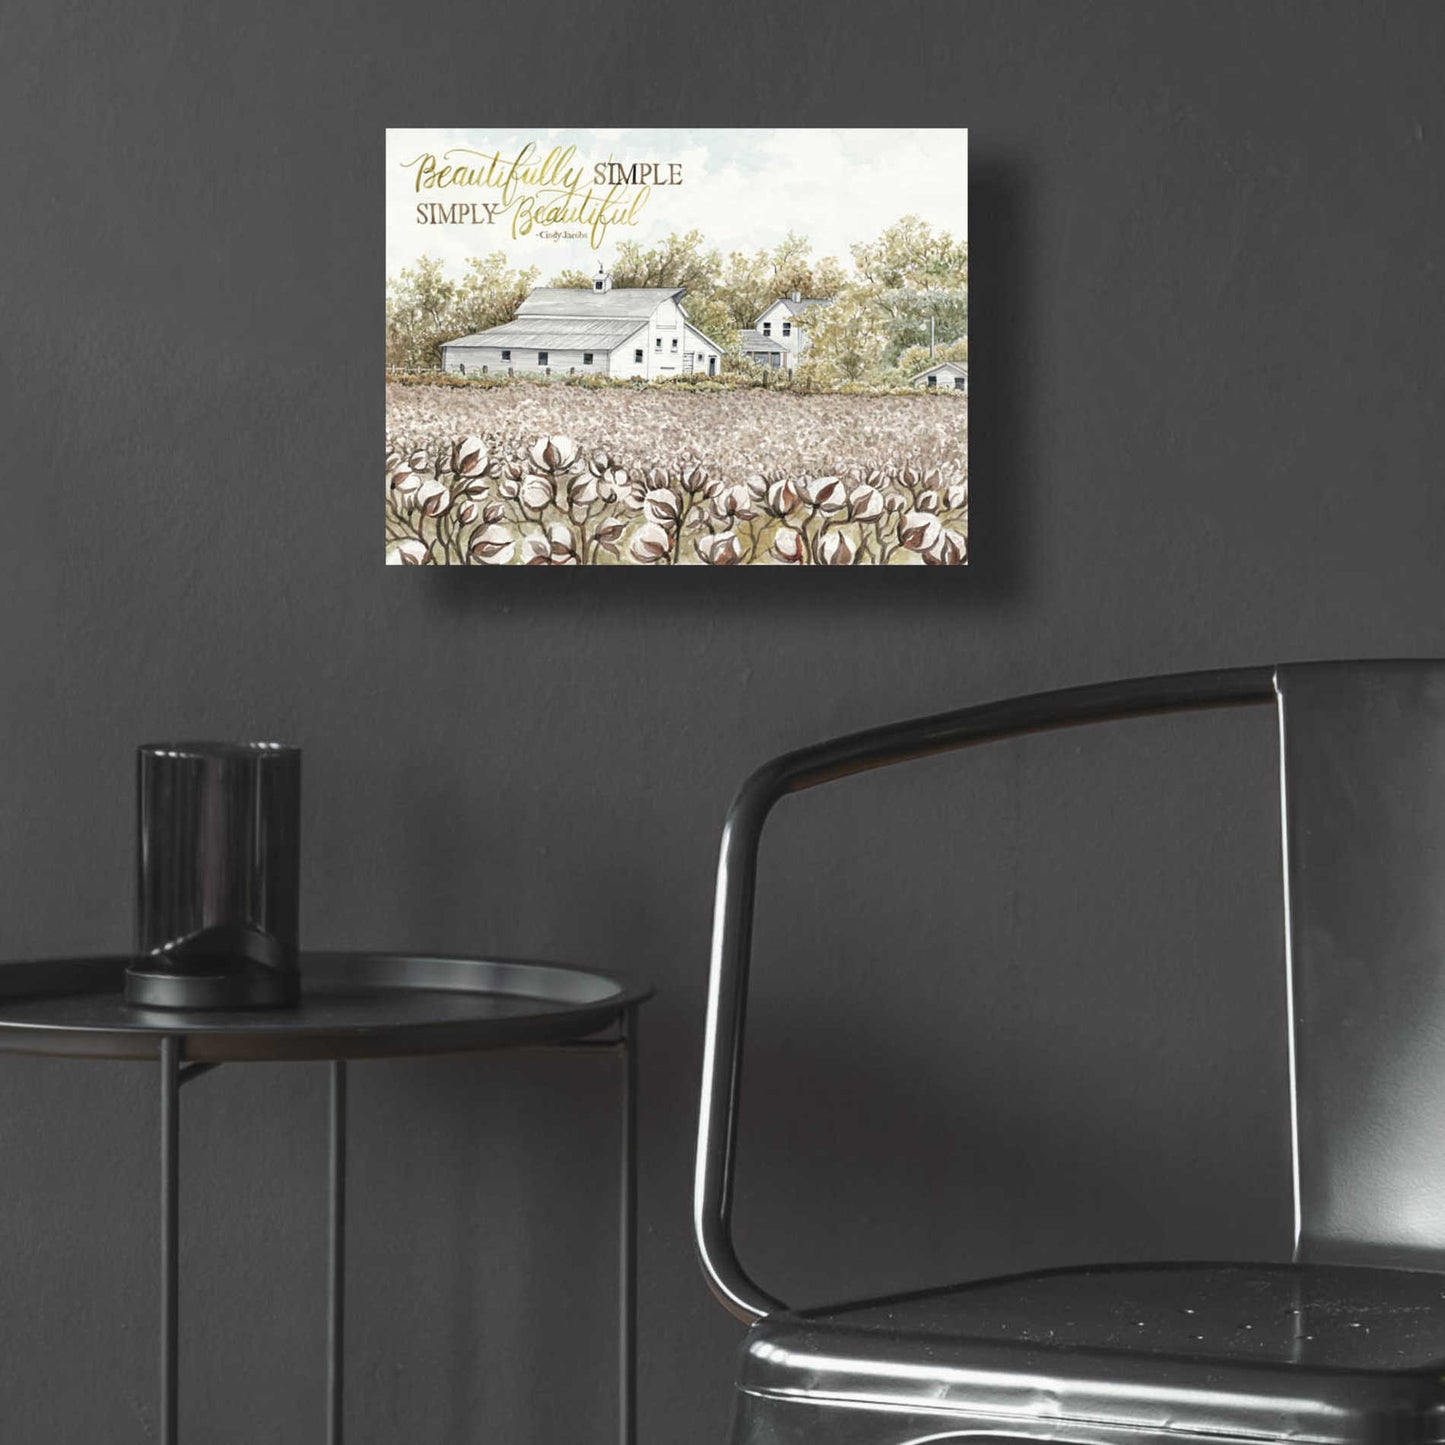 Epic Art 'Beautifully Simple Cotton Farm' by Cindy Jacobs, Acrylic Glass Wall Art,16x12